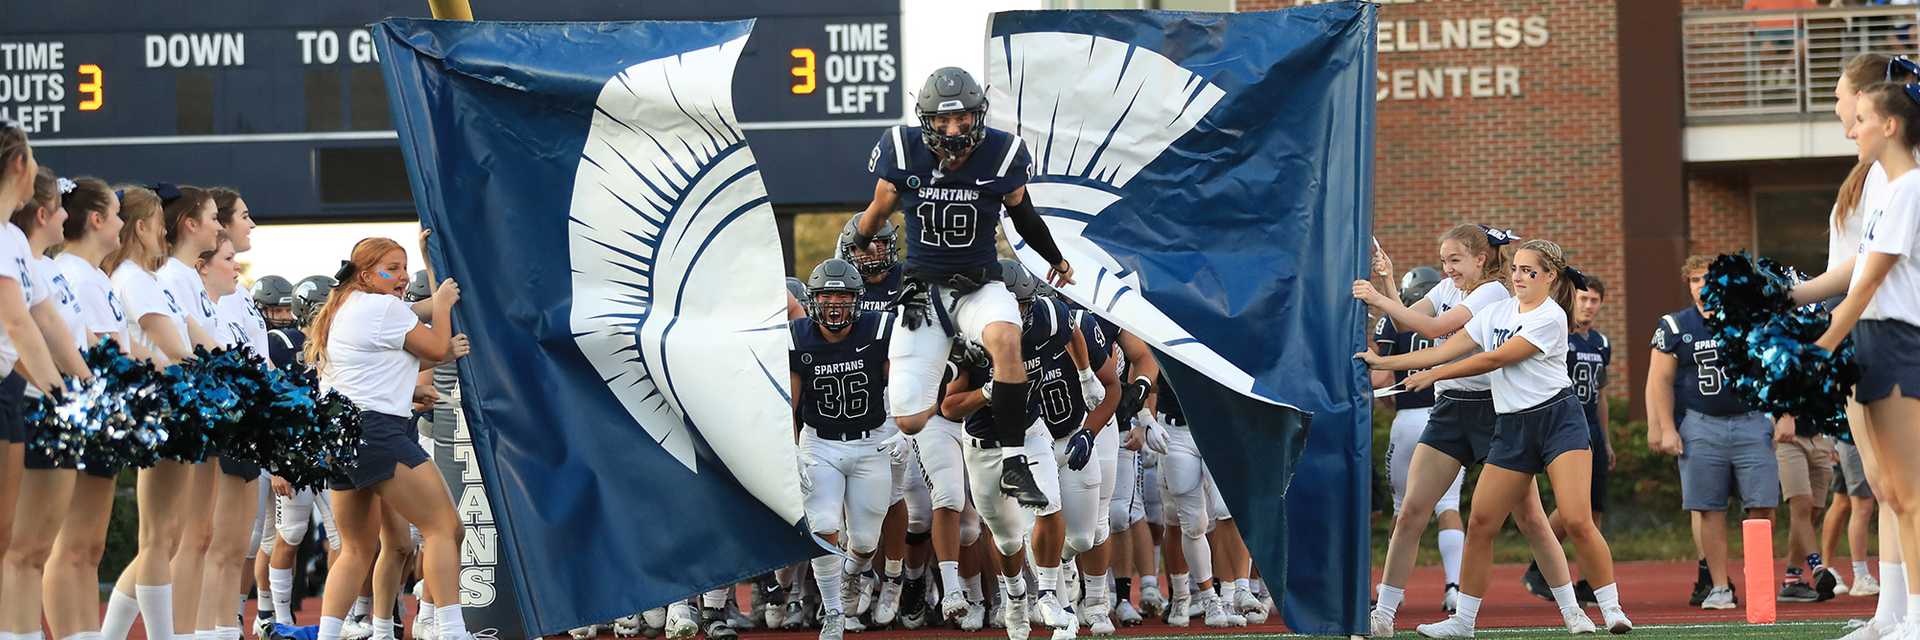 Photo of the Case Western Reserve University football team entering the field, with a player breaking through a banner that cheerleaders hold